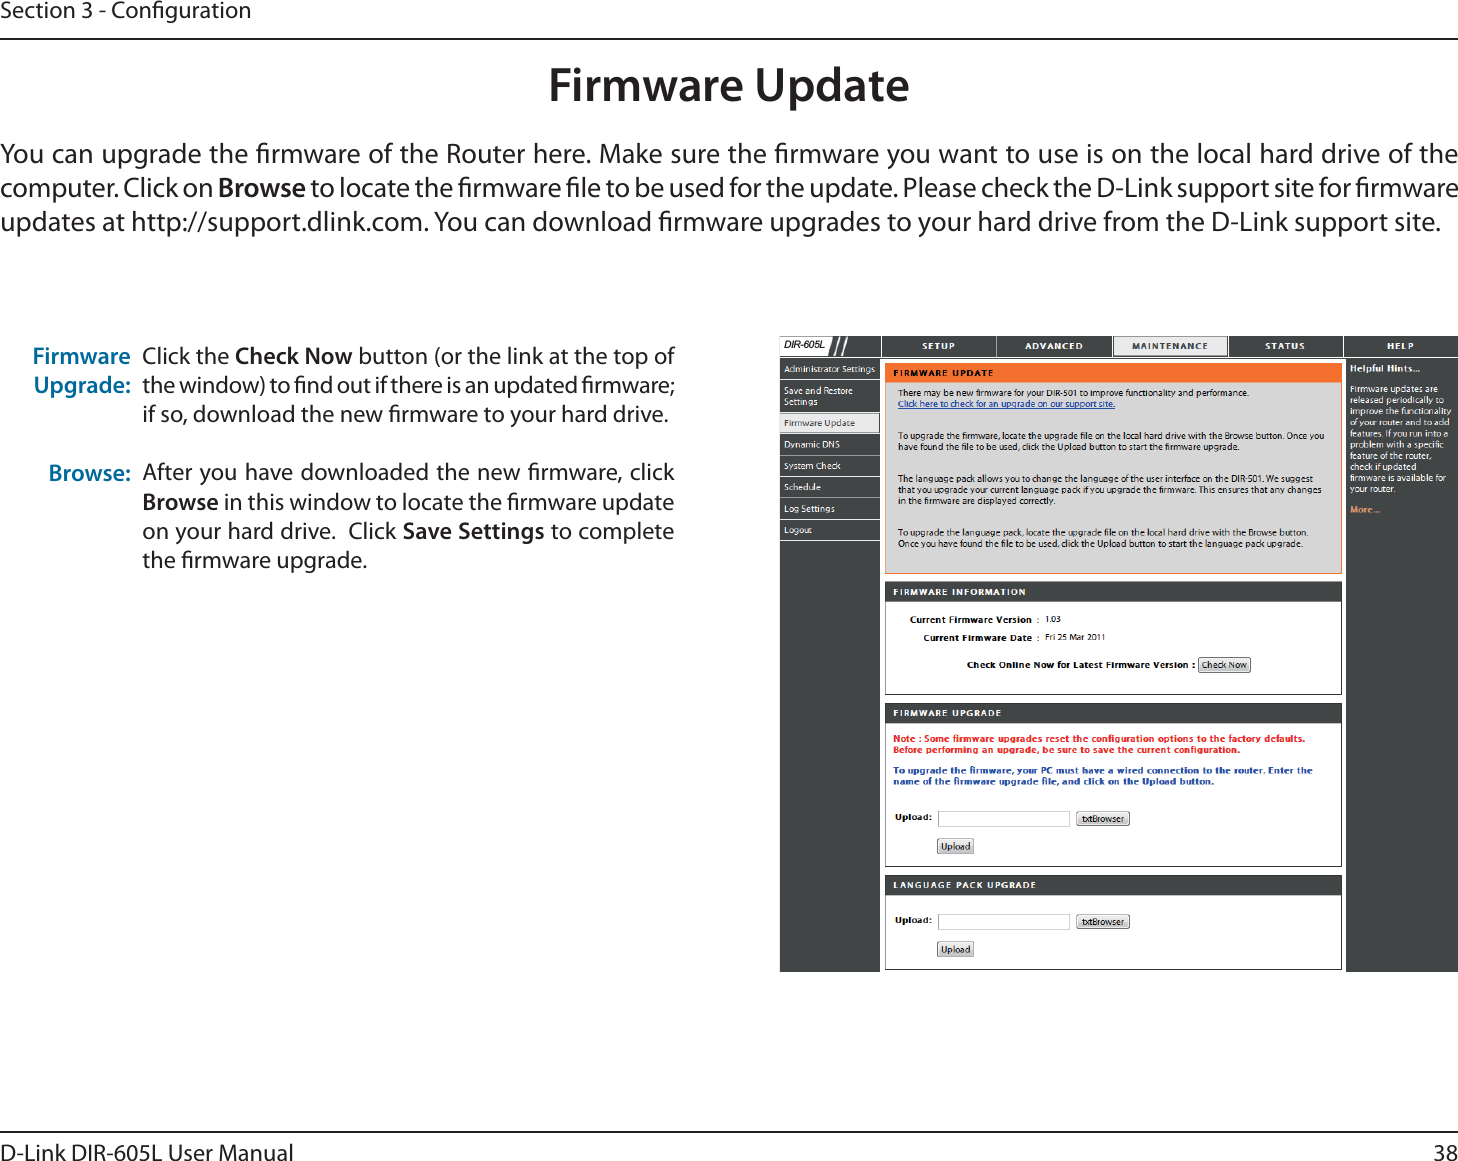 38D-Link DIR-605L User ManualSection 3 - CongurationFirmware UpdateClick the Check Now button (or the link at the top of the window) to nd out if there is an updated rmware; if so, download the new rmware to your hard drive.After you have downloaded the new rmware, click Browse in this window to locate the rmware update on your hard drive.  Click Save Settings to complete the rmware upgrade.Firmware Upgrade:Browse:You can upgrade the rmware of the Router here. Make sure the rmware you want to use is on the local hard drive of the computer. Click on Browse to locate the rmware le to be used for the update. Please check the D-Link support site for rmware updates at http://support.dlink.com. You can download rmware upgrades to your hard drive from the D-Link support site.&apos;,5/